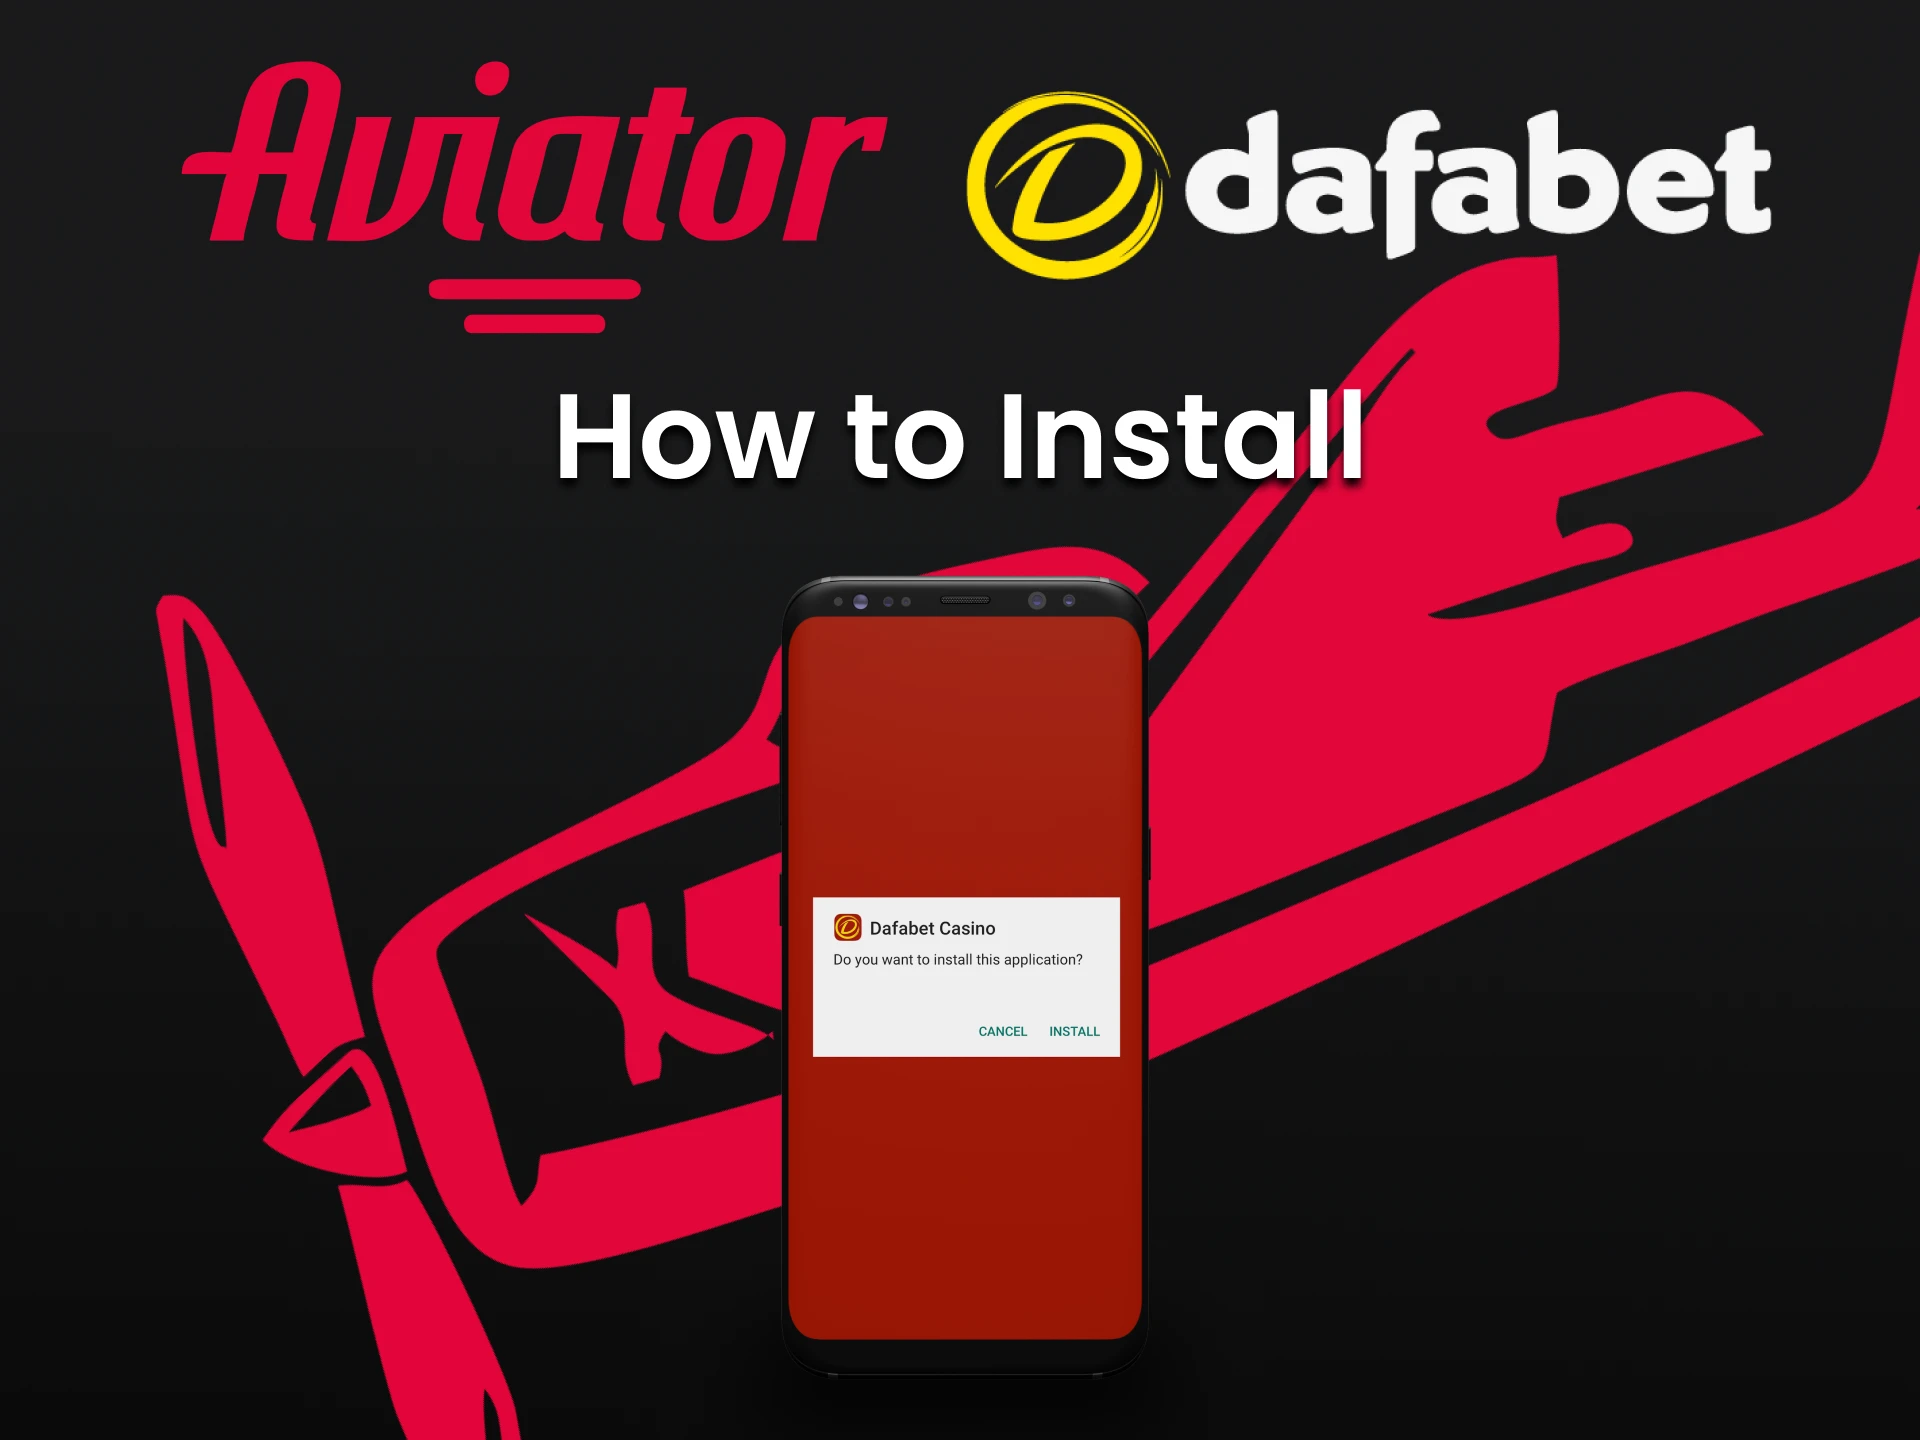 Install the Dafabet app to play Aviator on your phone.